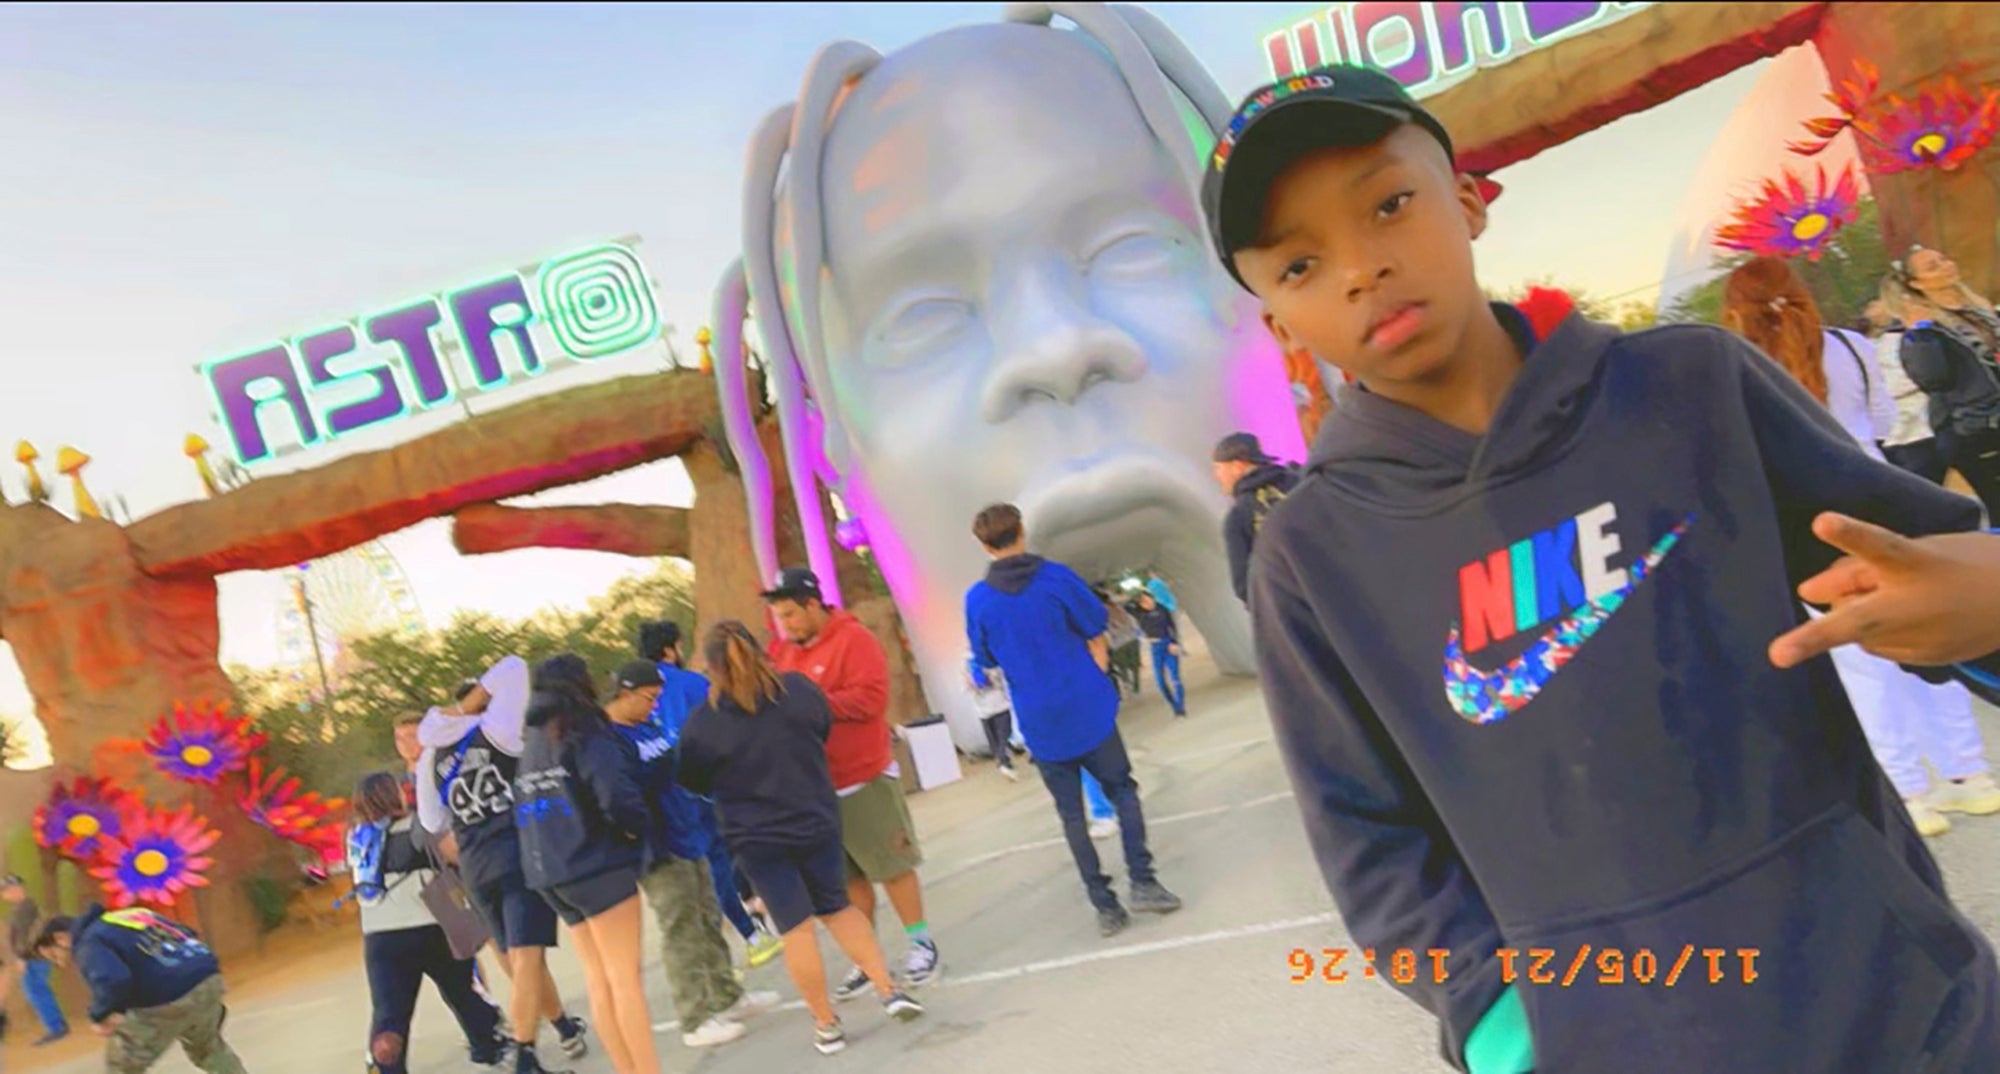 Ezra Blount, 9, the youngest victim of the Astroworld festival tragedy in a photo provided by his mother